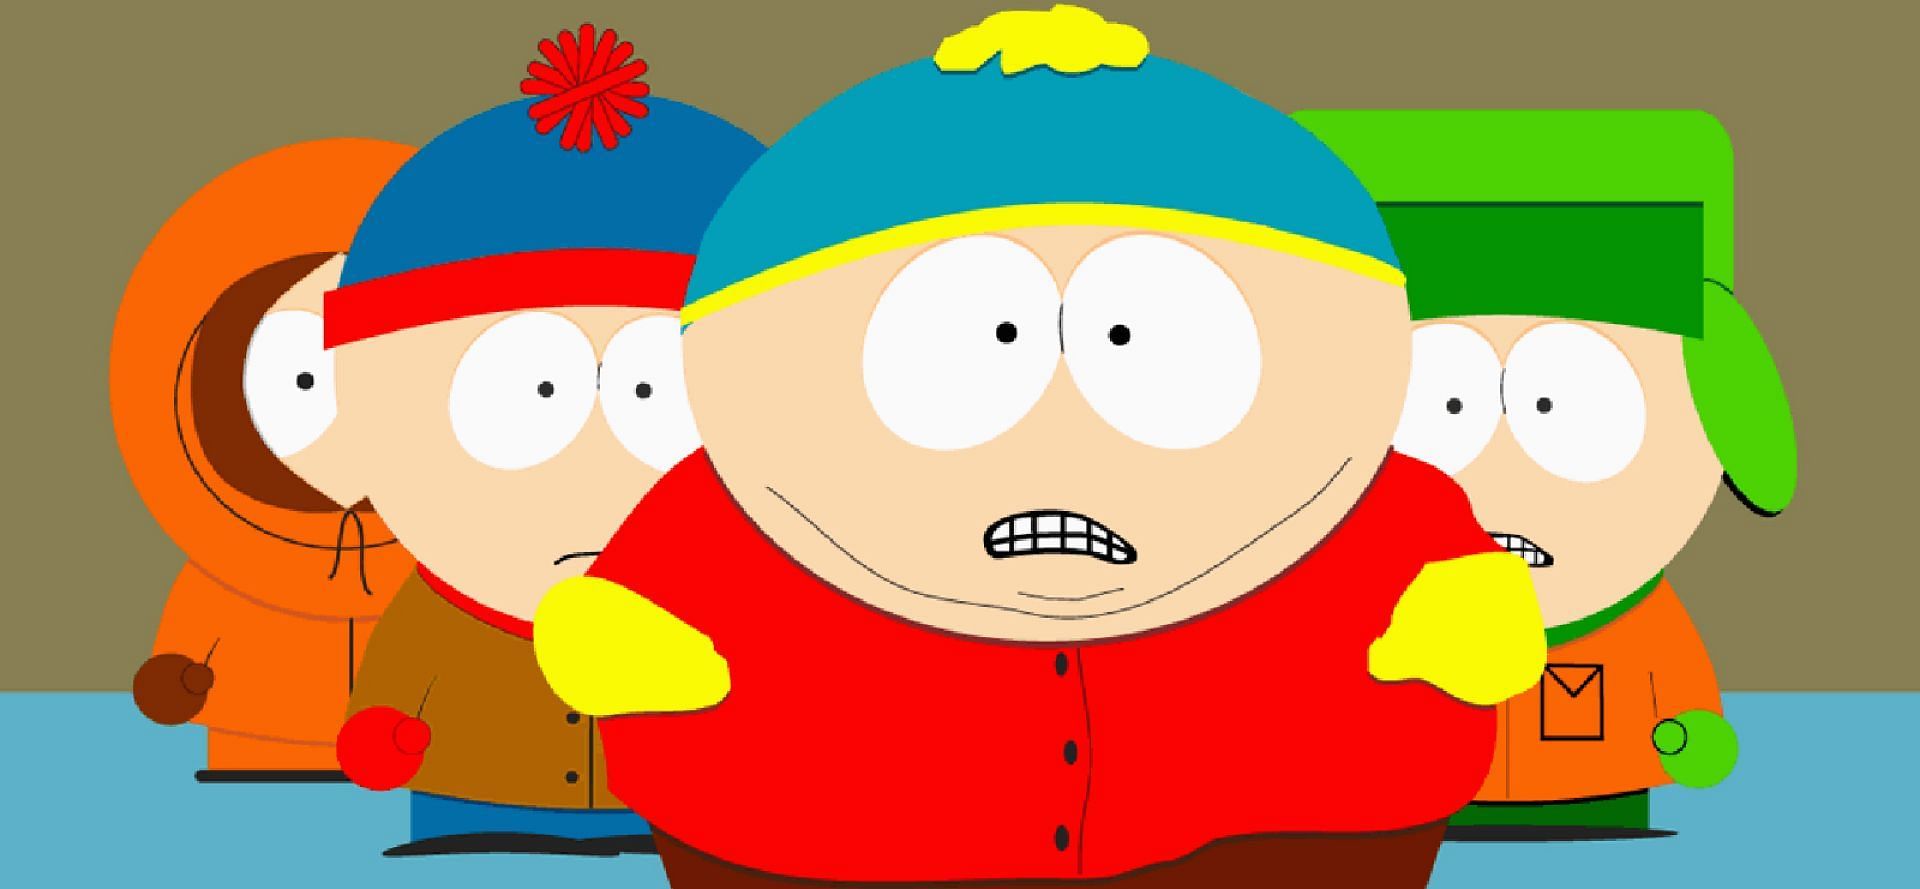 South Park Season 26 Episode 5 release date and more (Image via Comedy Central)